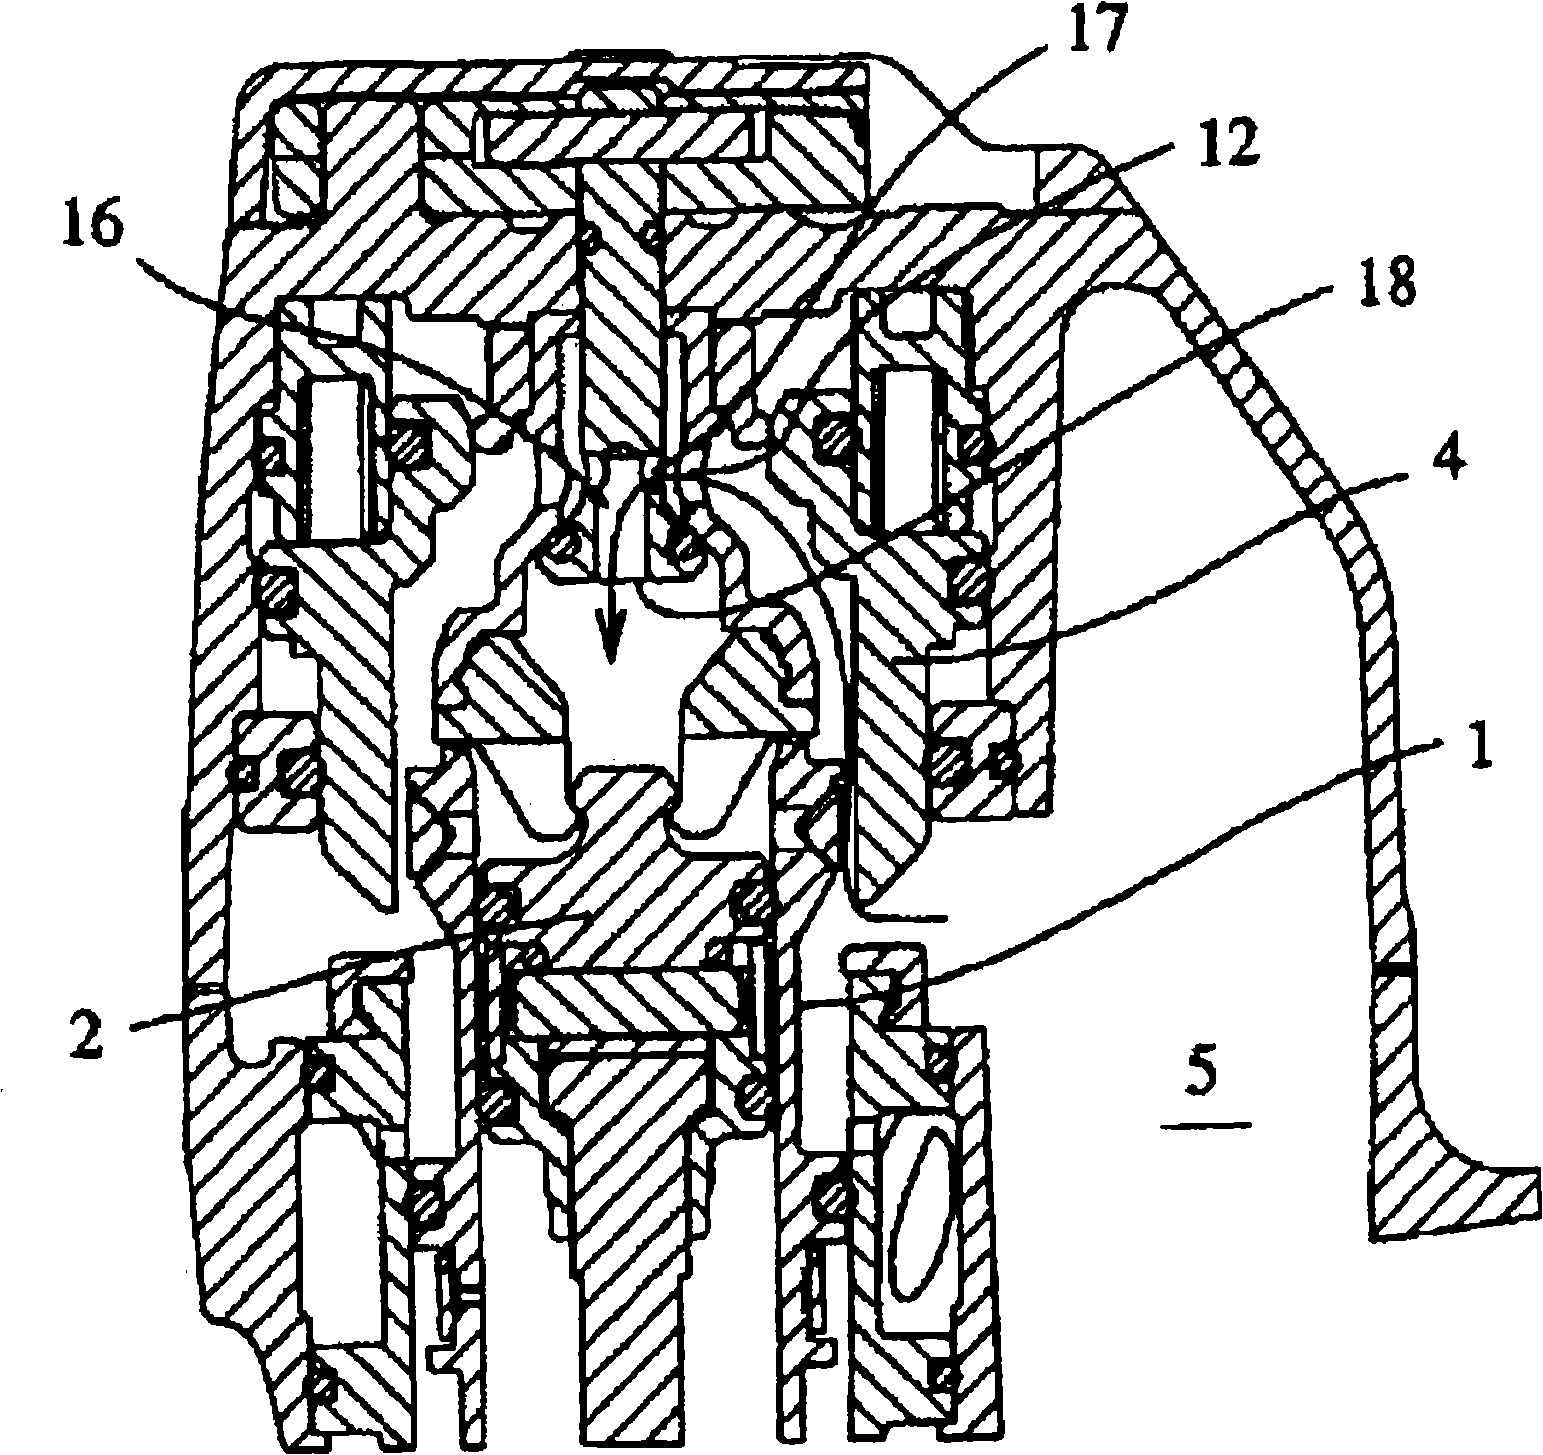 Air pressure type screw nail infiltrating device